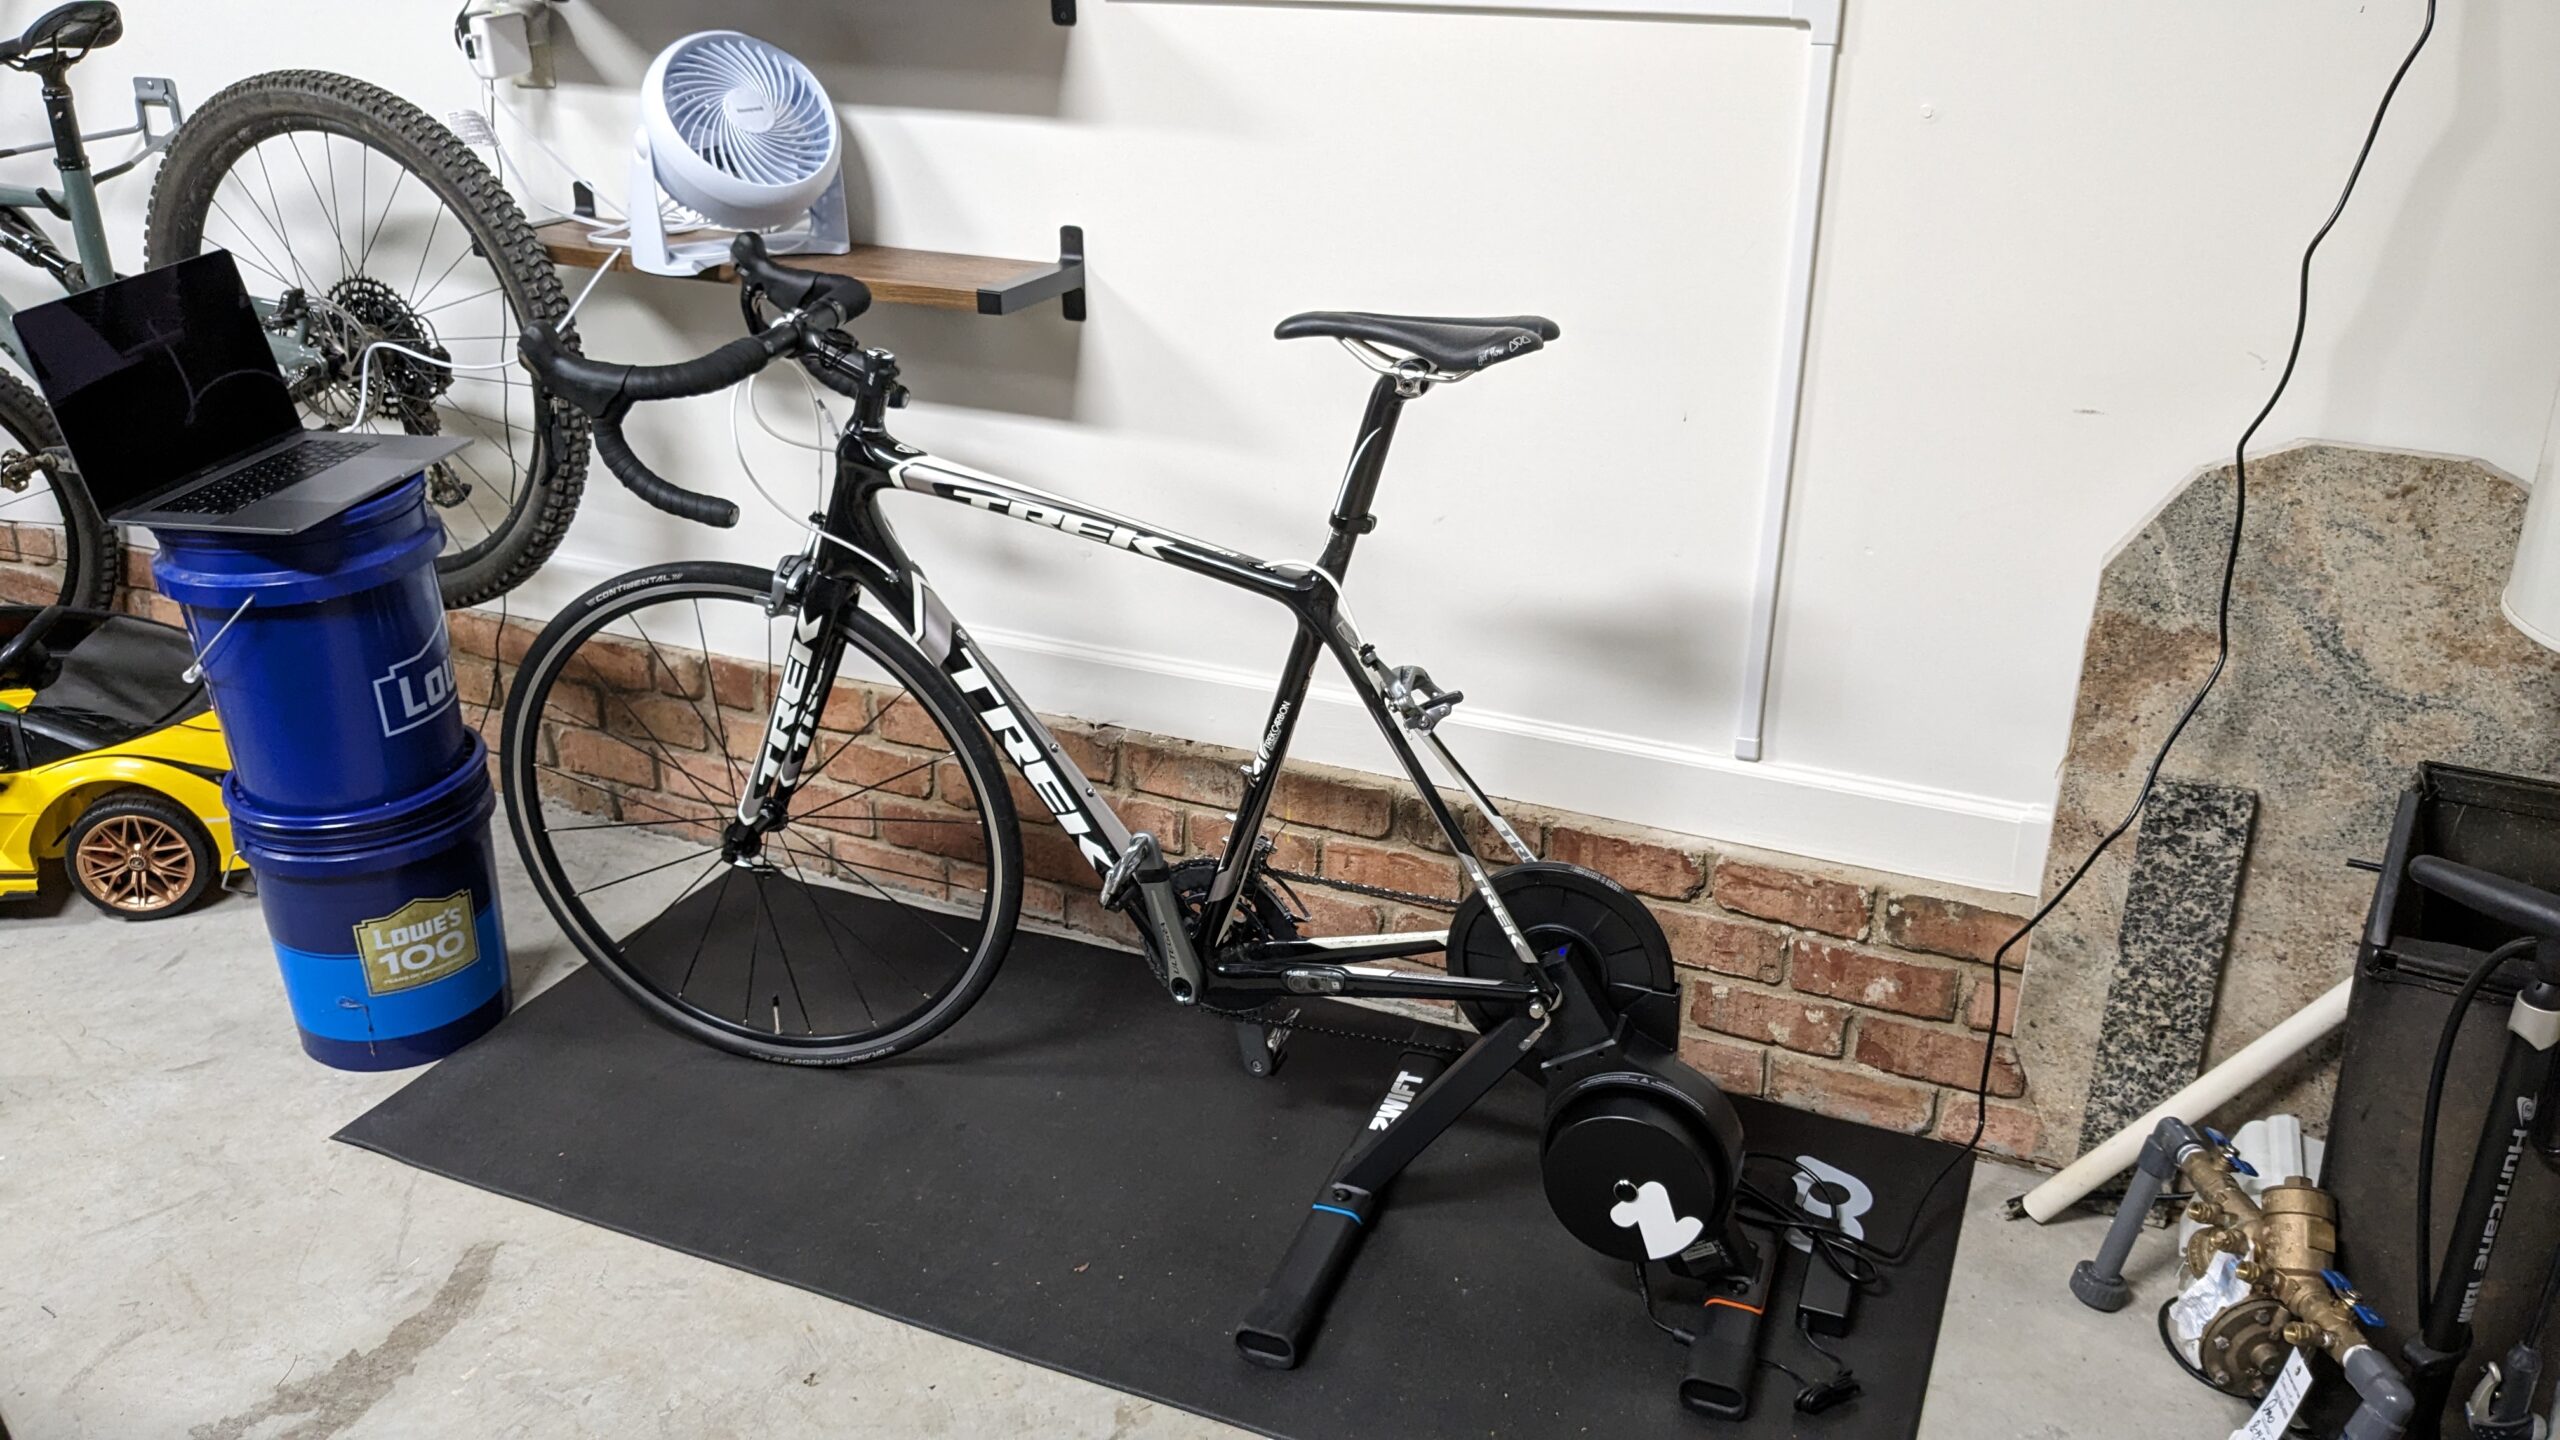 Photo of my bike mounted on the bike trainer in my garage. There's a black mat underneath, shelves on the wall with a fan on one of the shelves, and two 5 gallon Lowe's buckets stacked with a laptop on top.